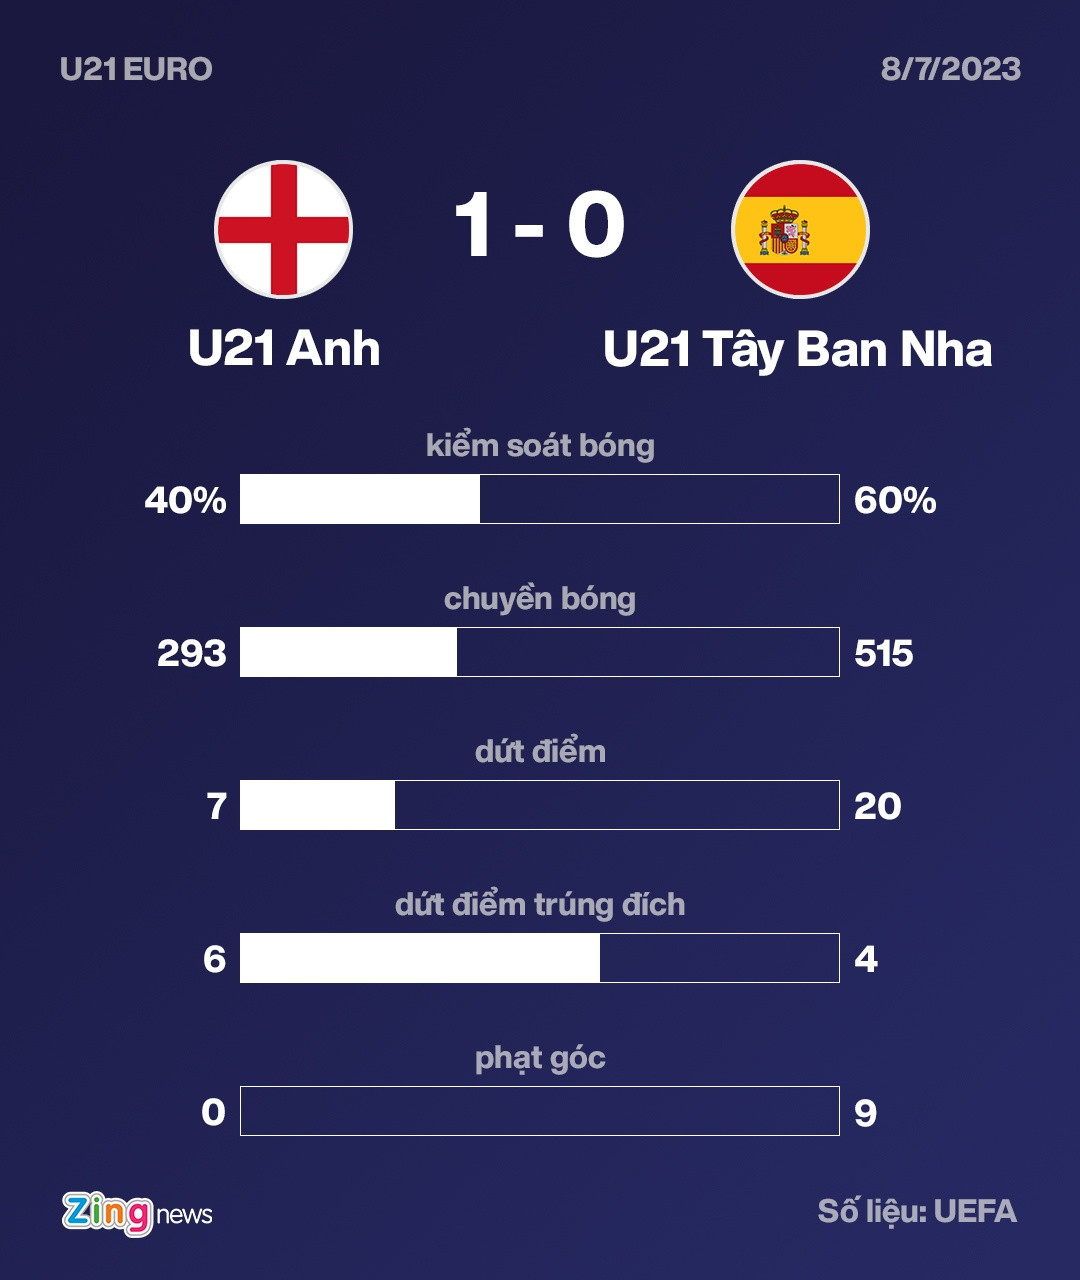 U21 Anh vo dich anh 2